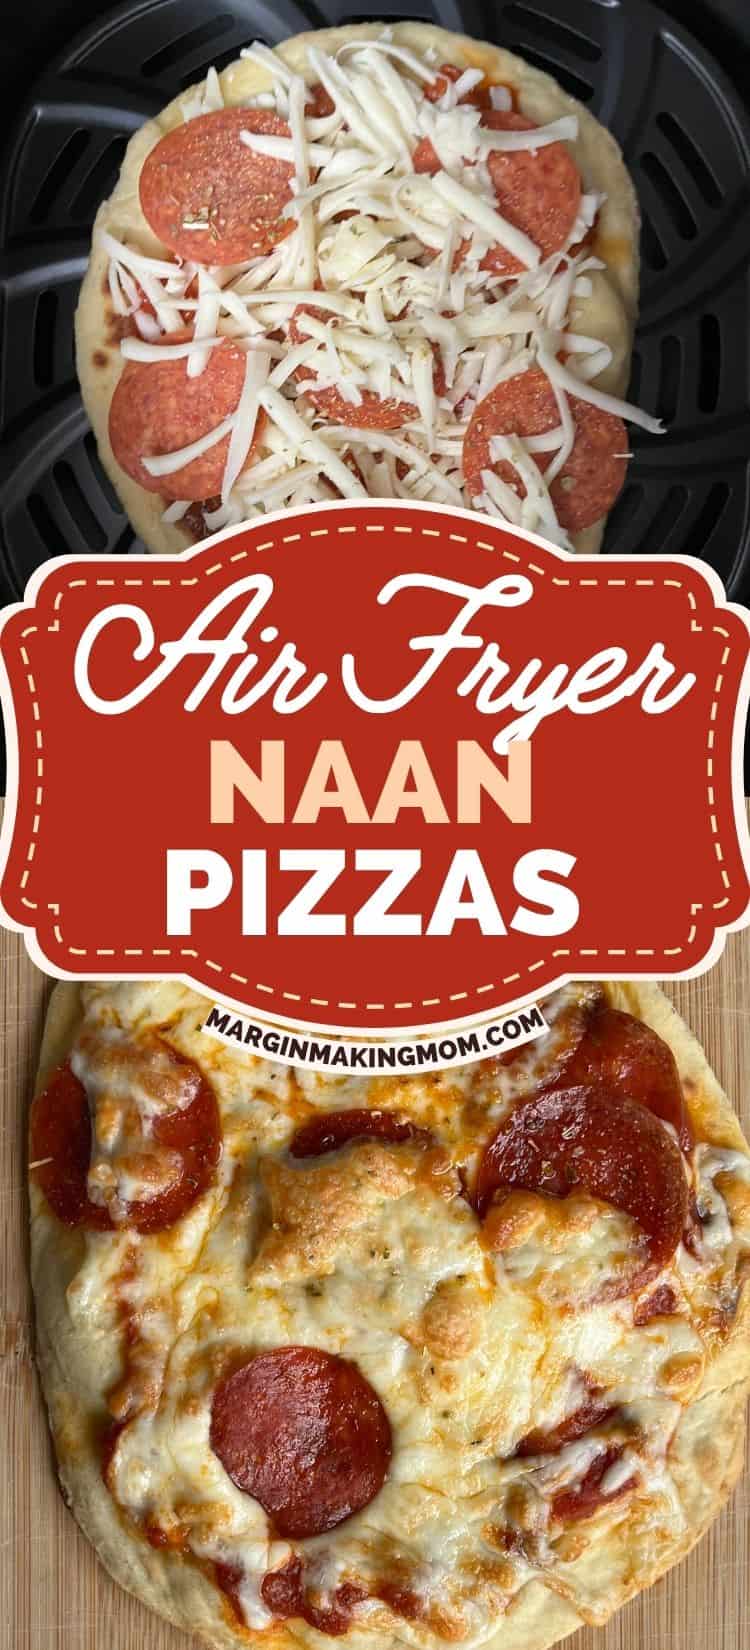 two photos; one shows an unbaked naan pizza in an air fryer basket, the other shows a freshly baked pepperoni pizza on a cutting board